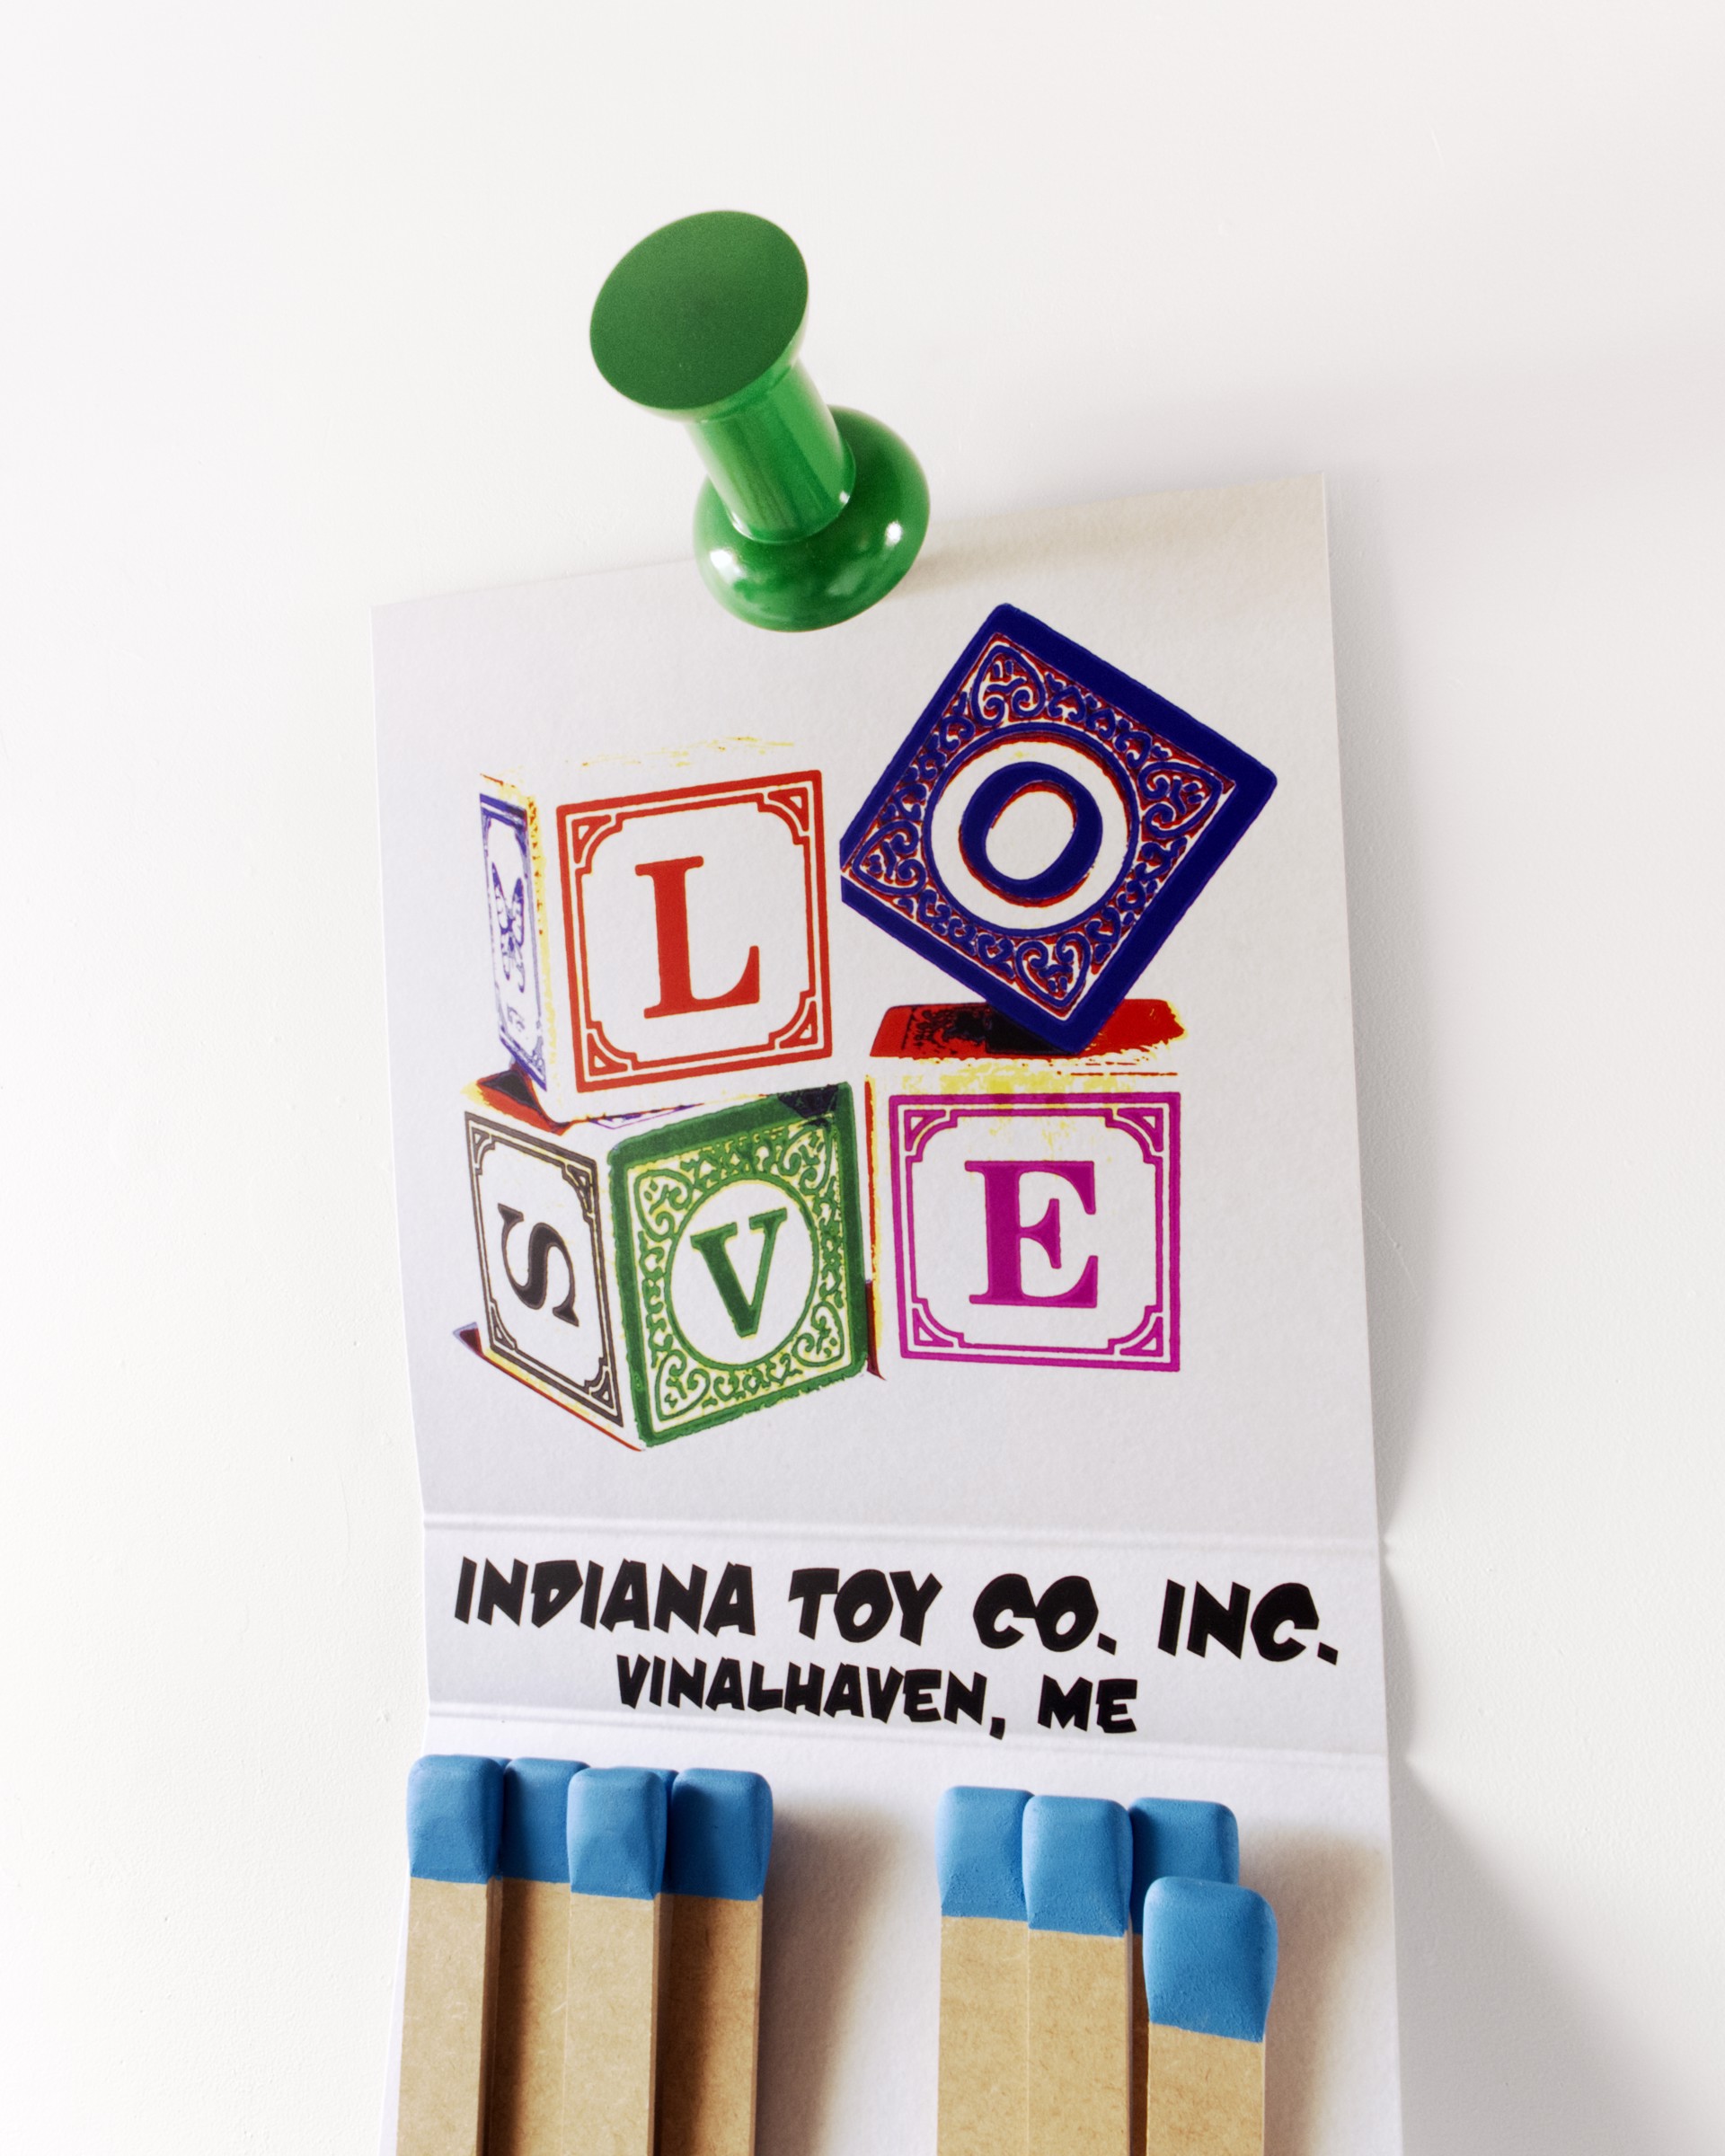 Indiana Toy Co. by Miles Jaffe